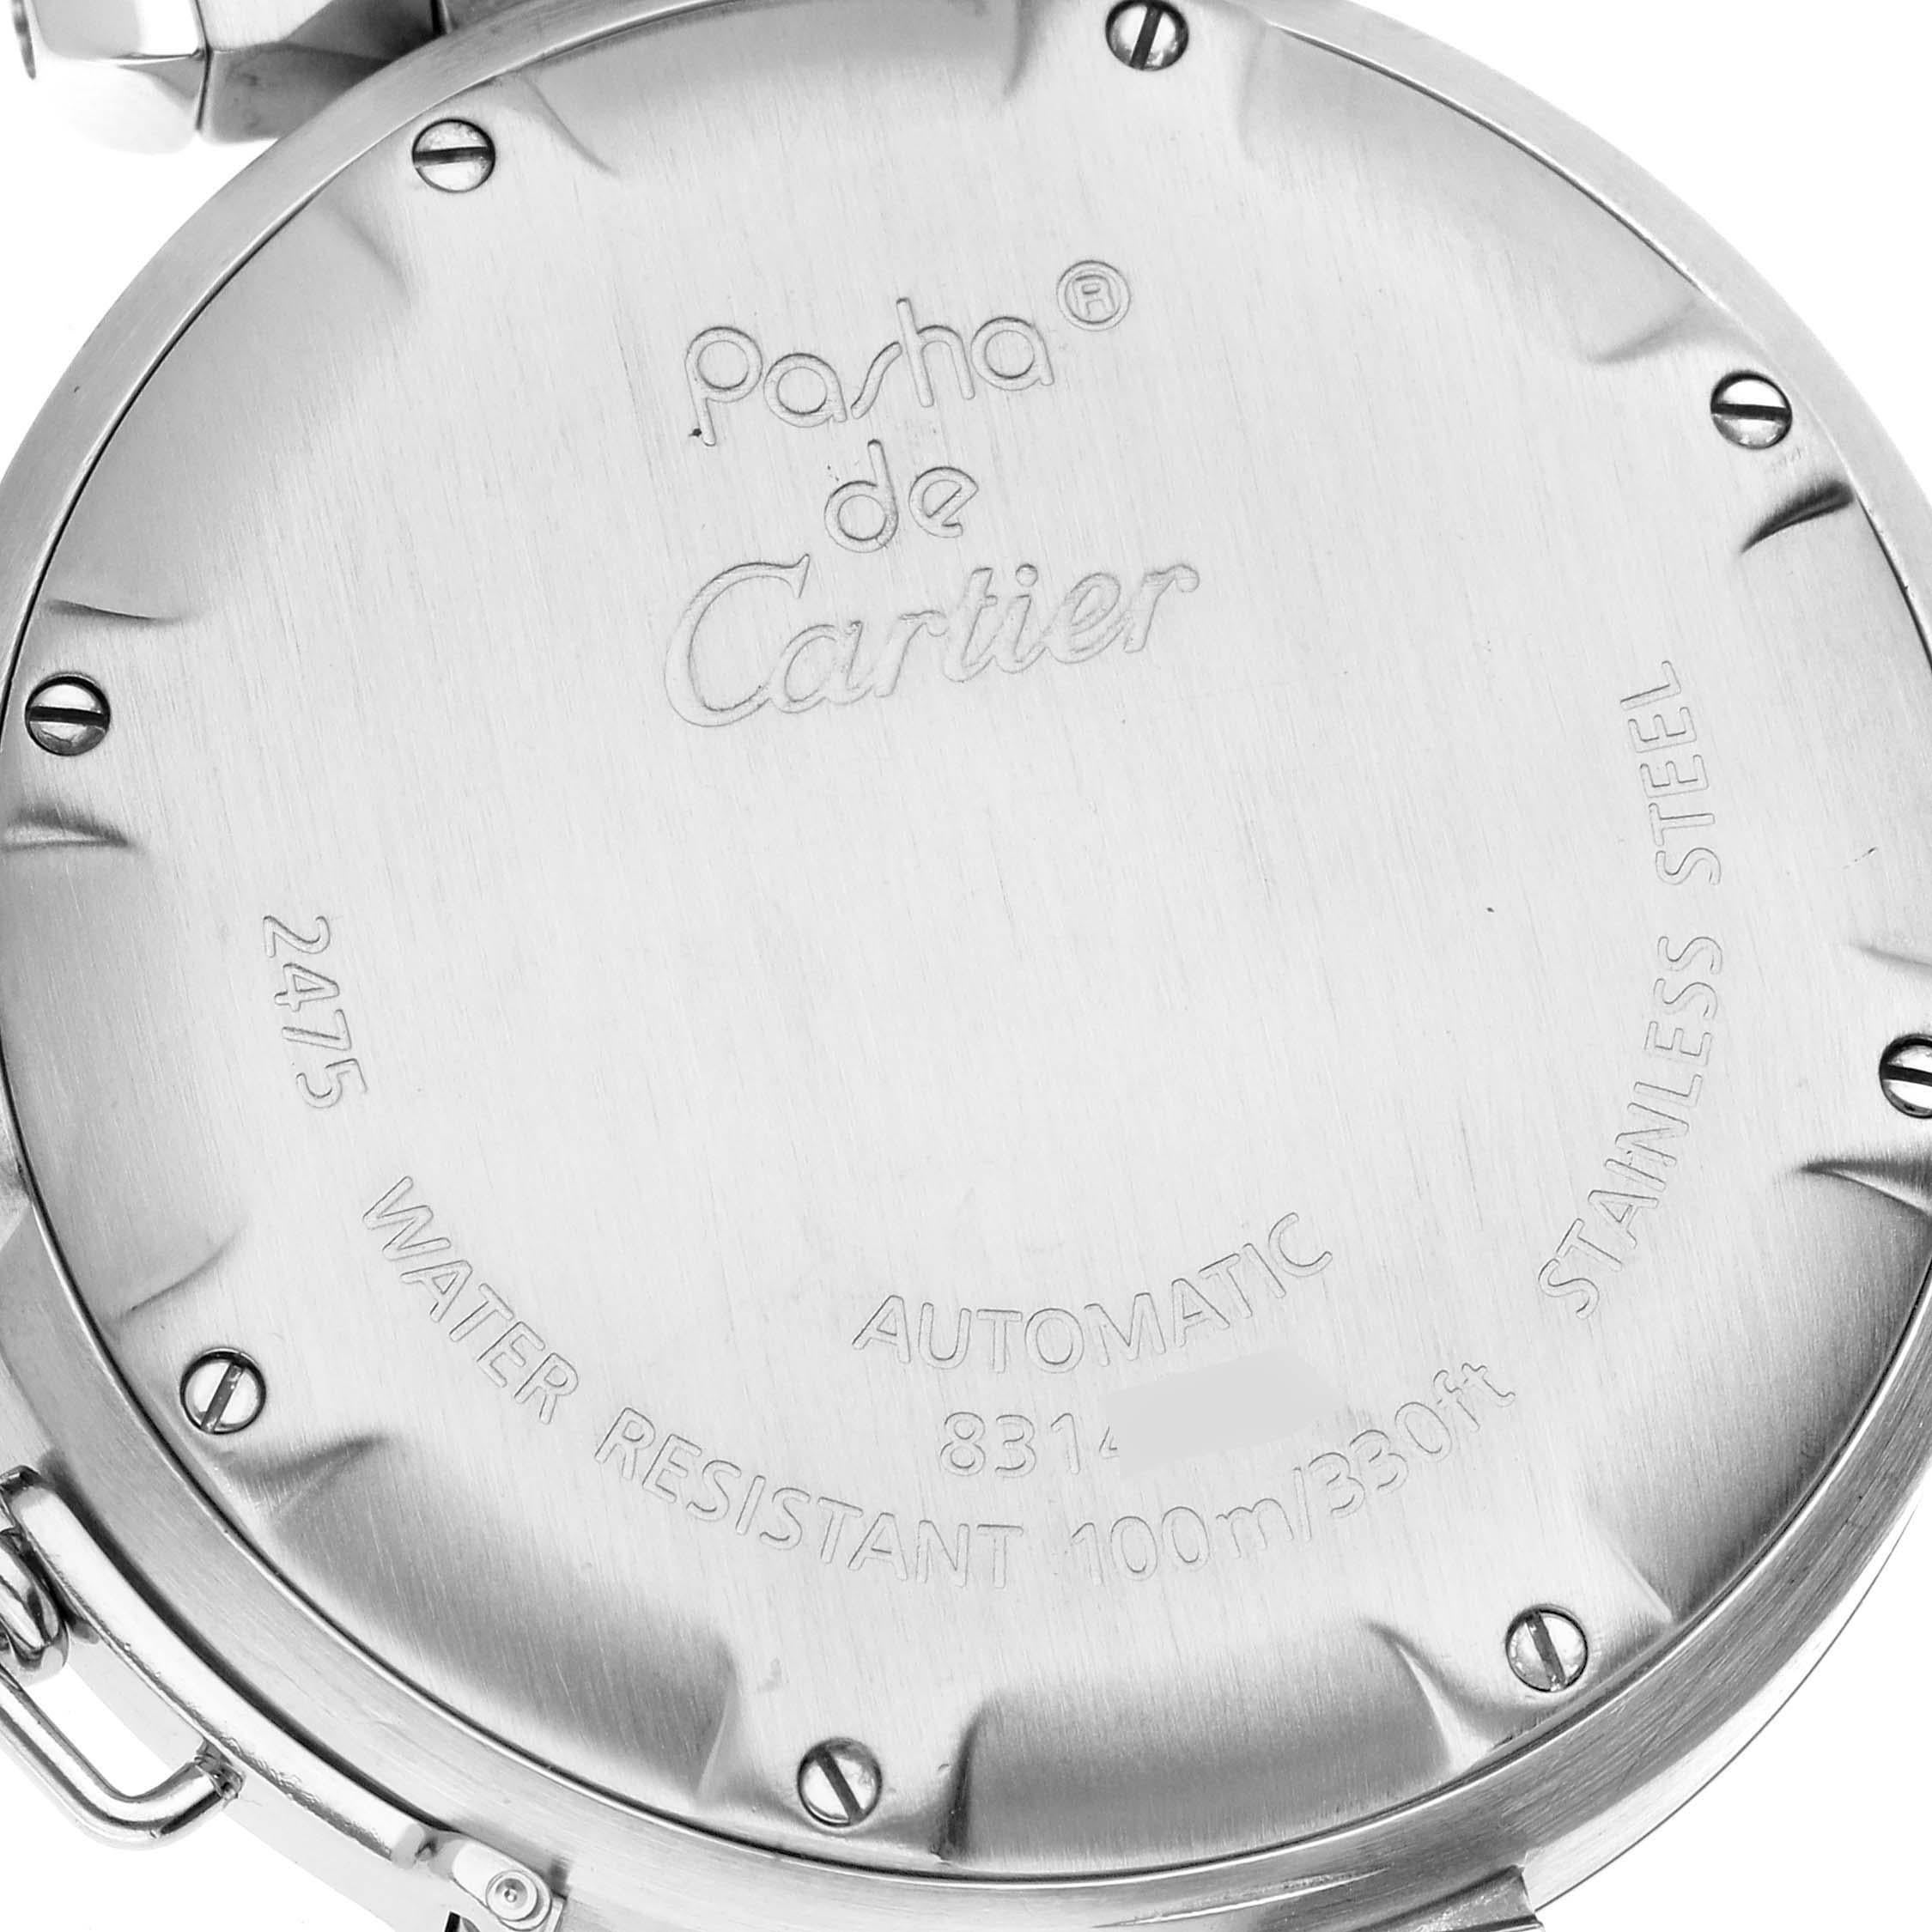 Cartier Pasha C Midsize Big Date White Dial Steel Mens Watch W31044M7 For Sale 4